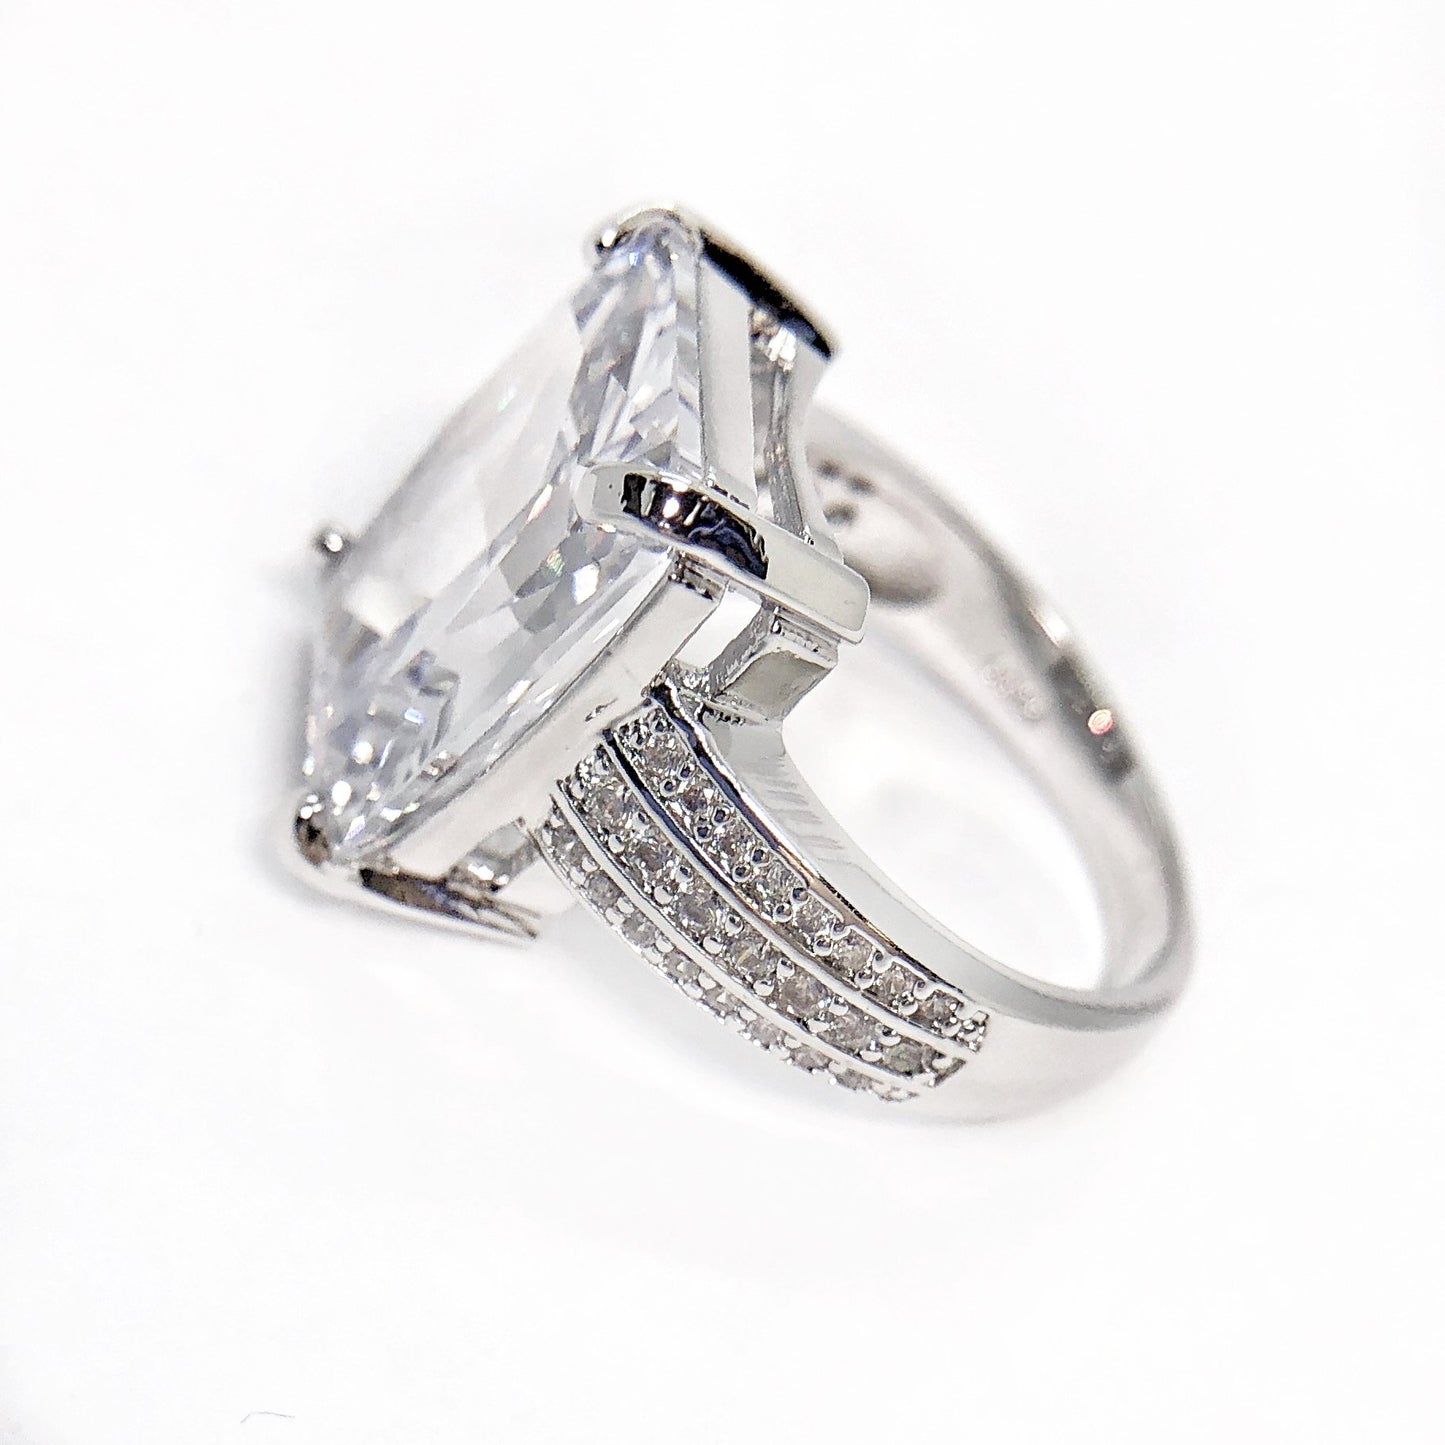 Fire Radiant Emerald Cut Zirconia White Gold Cocktail Ring